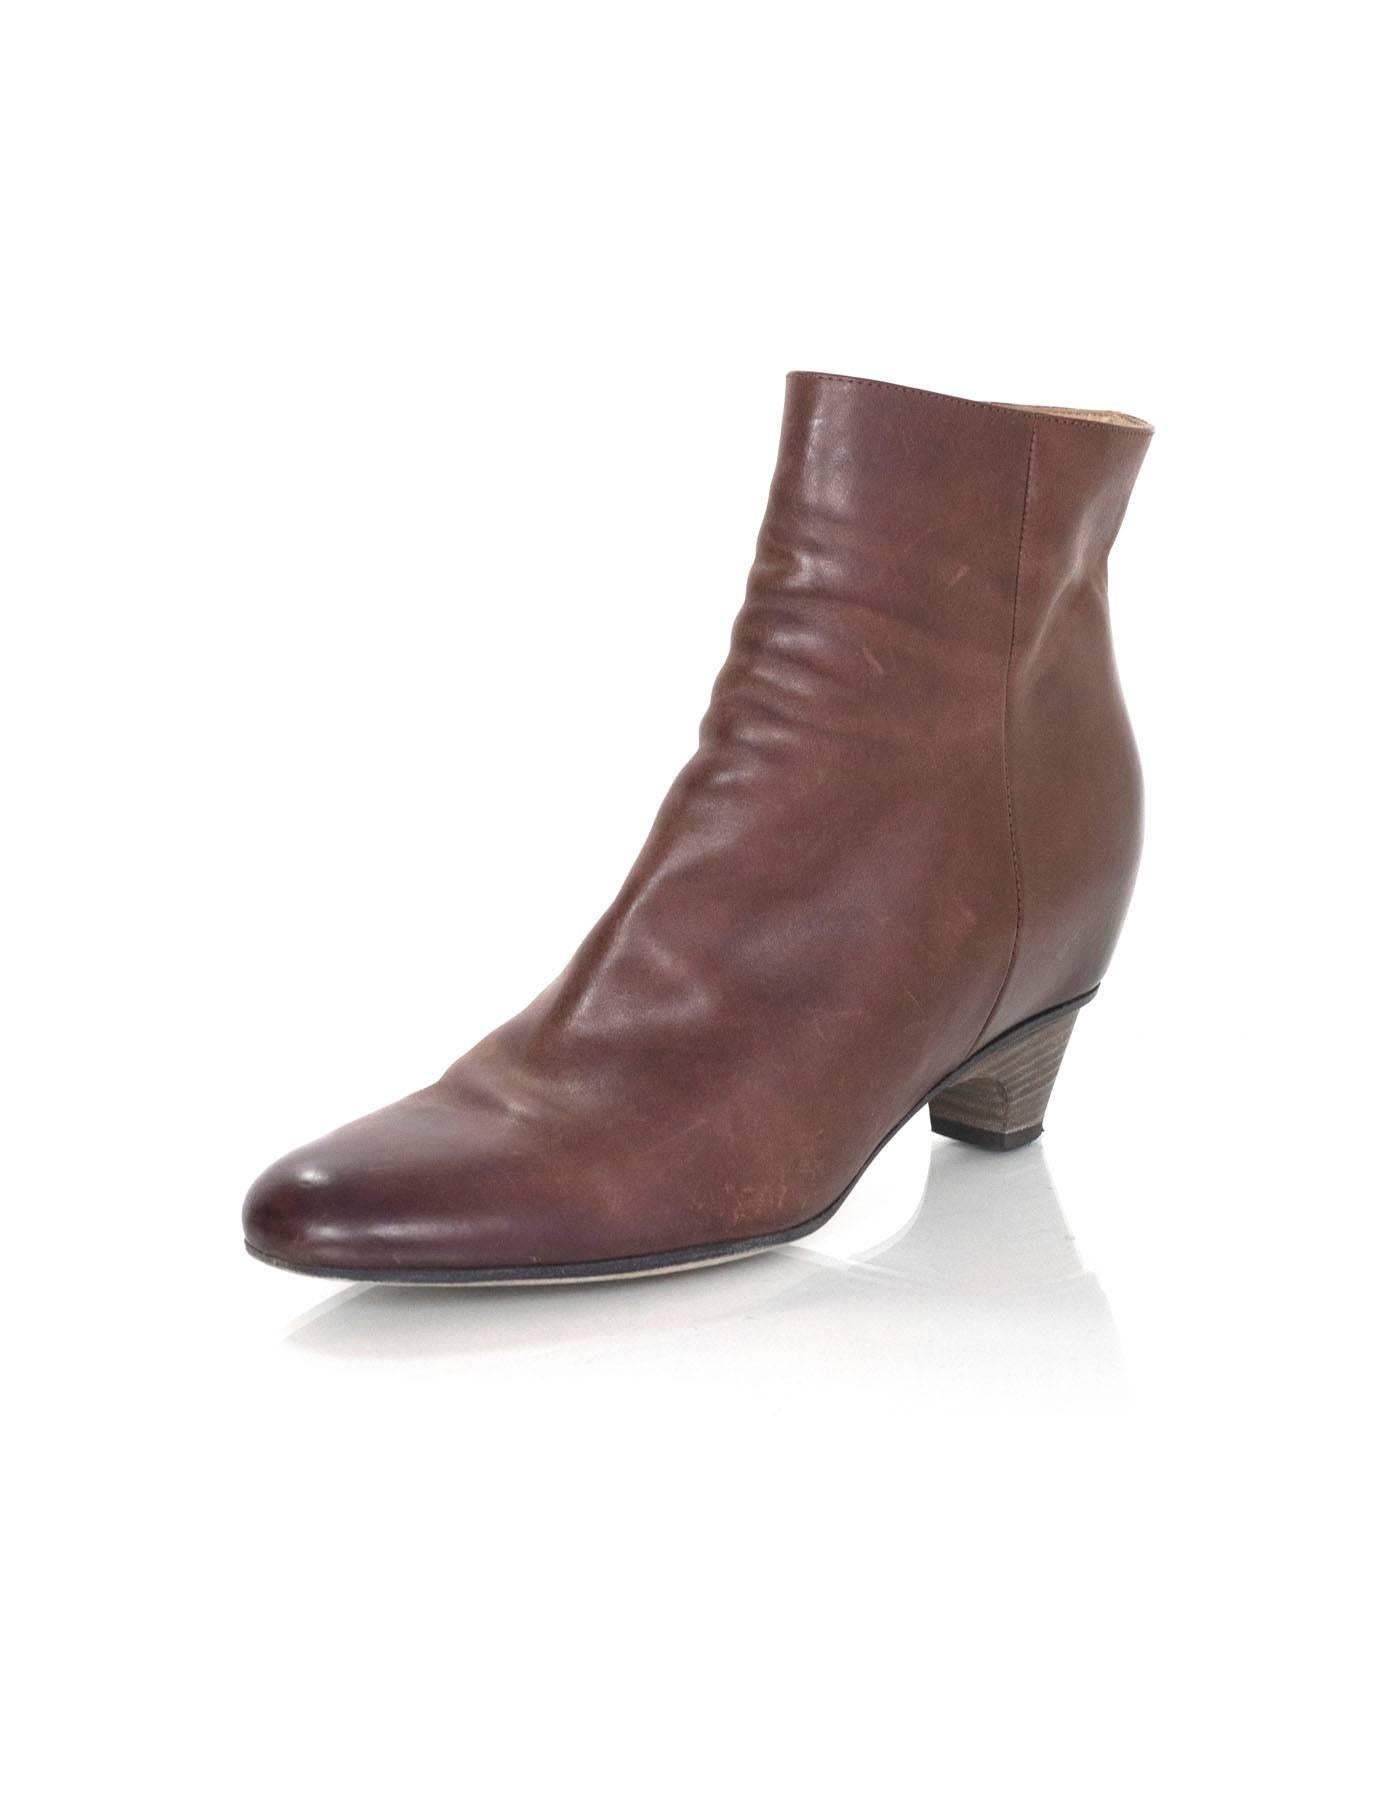 Maison Martin Margiela Brown Leather Ankle Boots Sz 39.5

Made In: Italy
Color: Brown
Materials: Leather
Closure/Opening: Side zip closure
Sole Stamp: 39.5 made in italy
Overall Condition: Very good pre-owned condition with the exception of marks